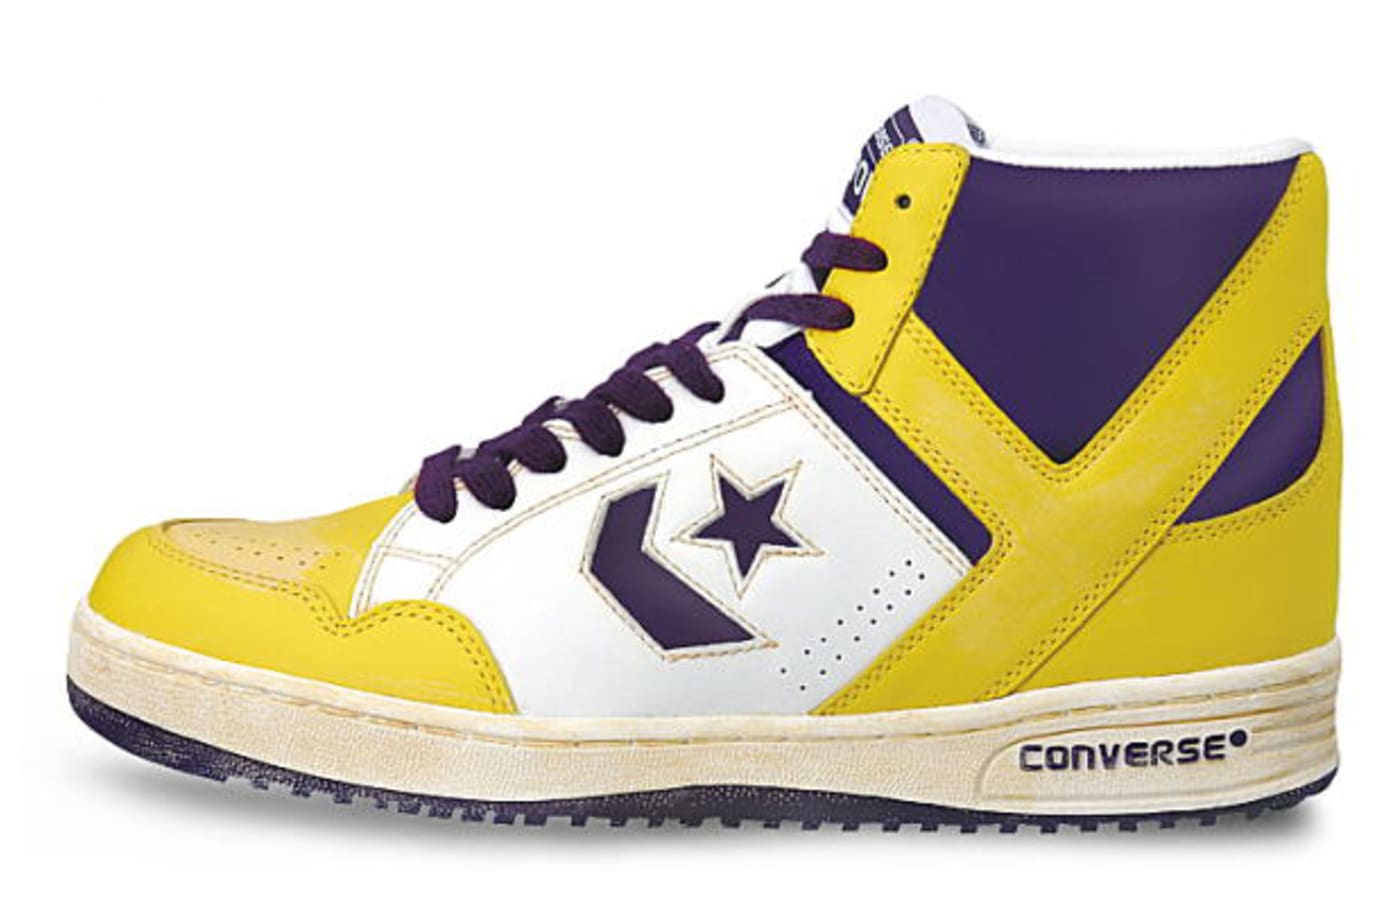 converse the weapon shoes